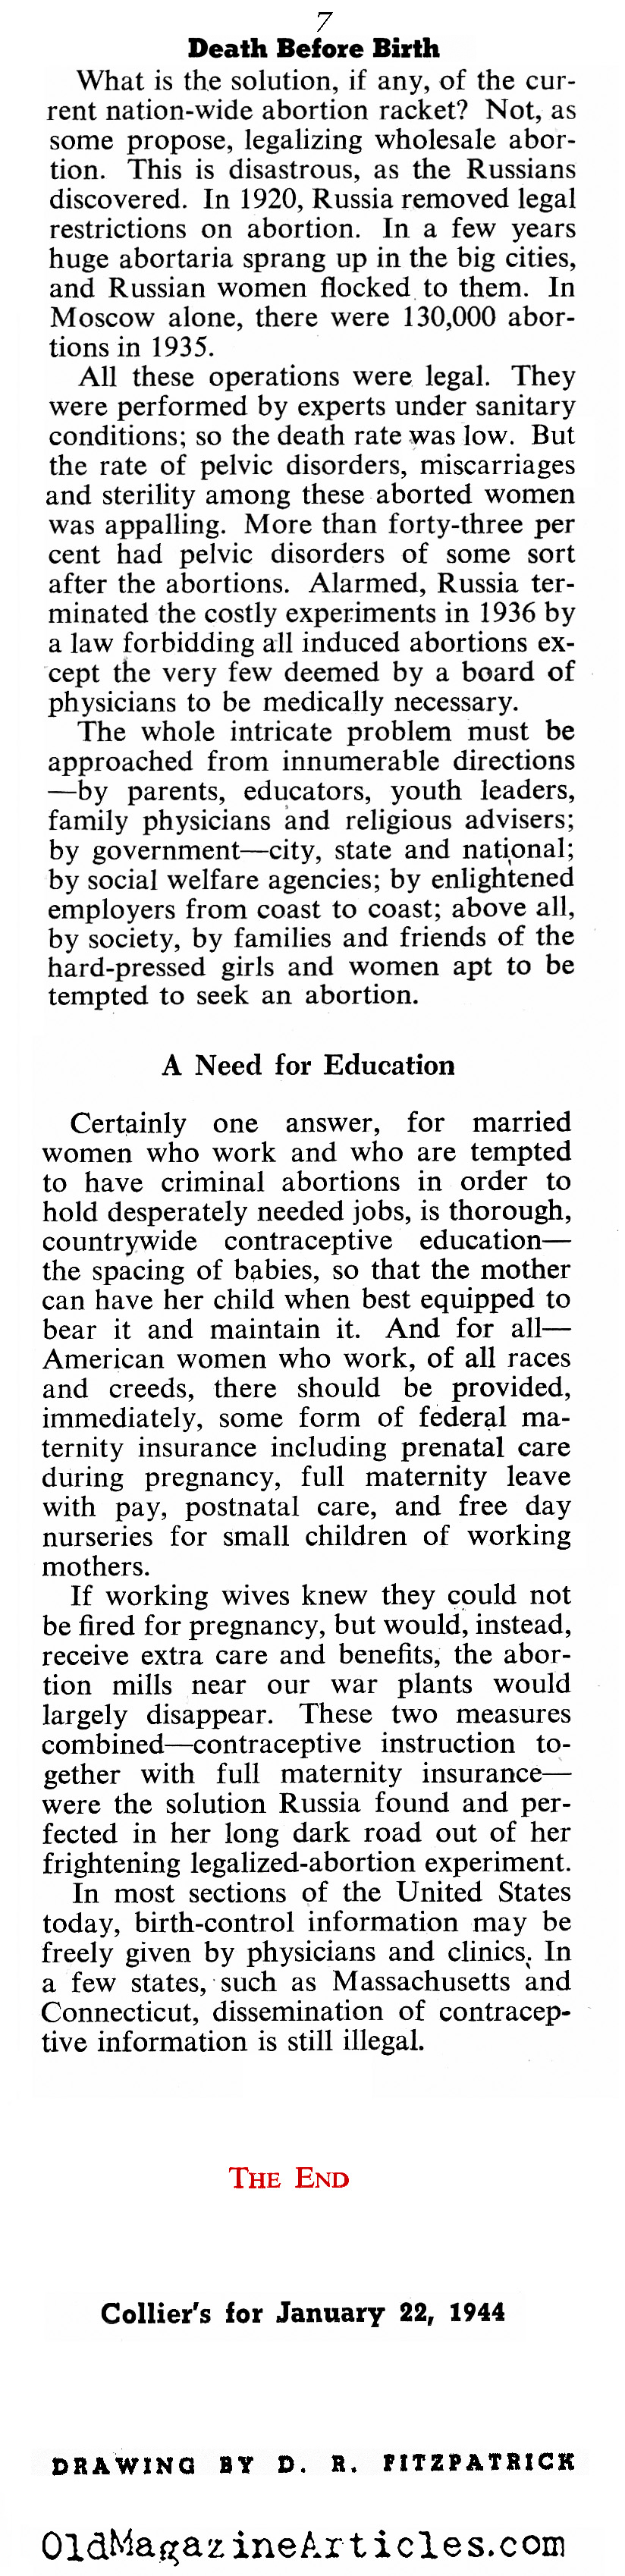 The Growing Popularity of Abortions (Collier's Magazine, 1944)